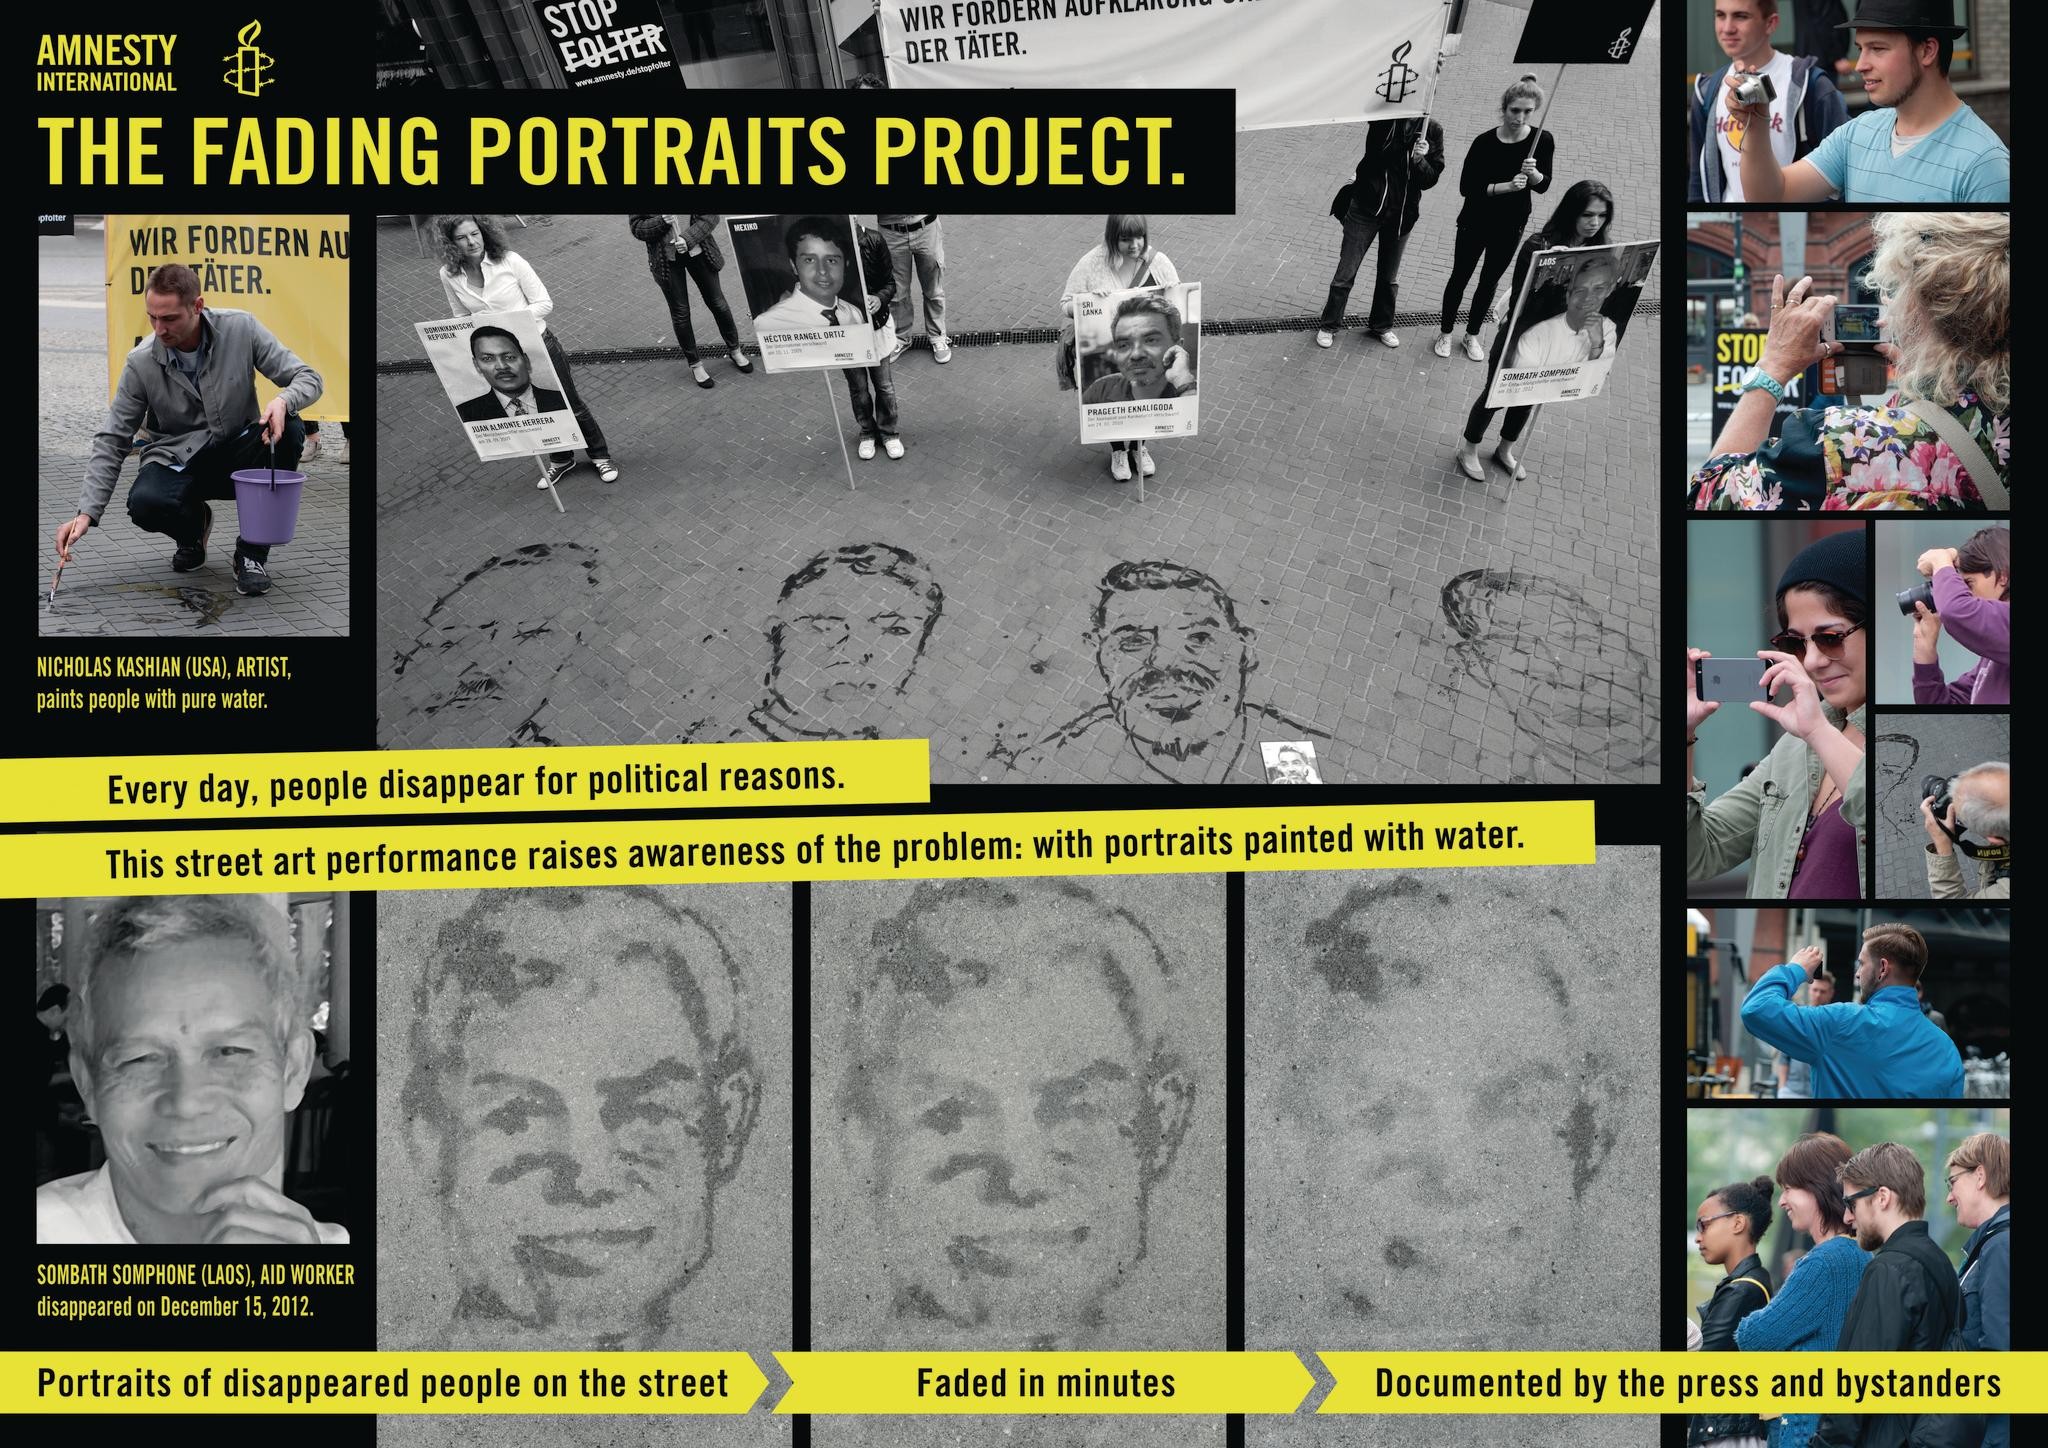 AMNESTY INTERNATIONAL - THE FADING PORTRAITS PROJECT